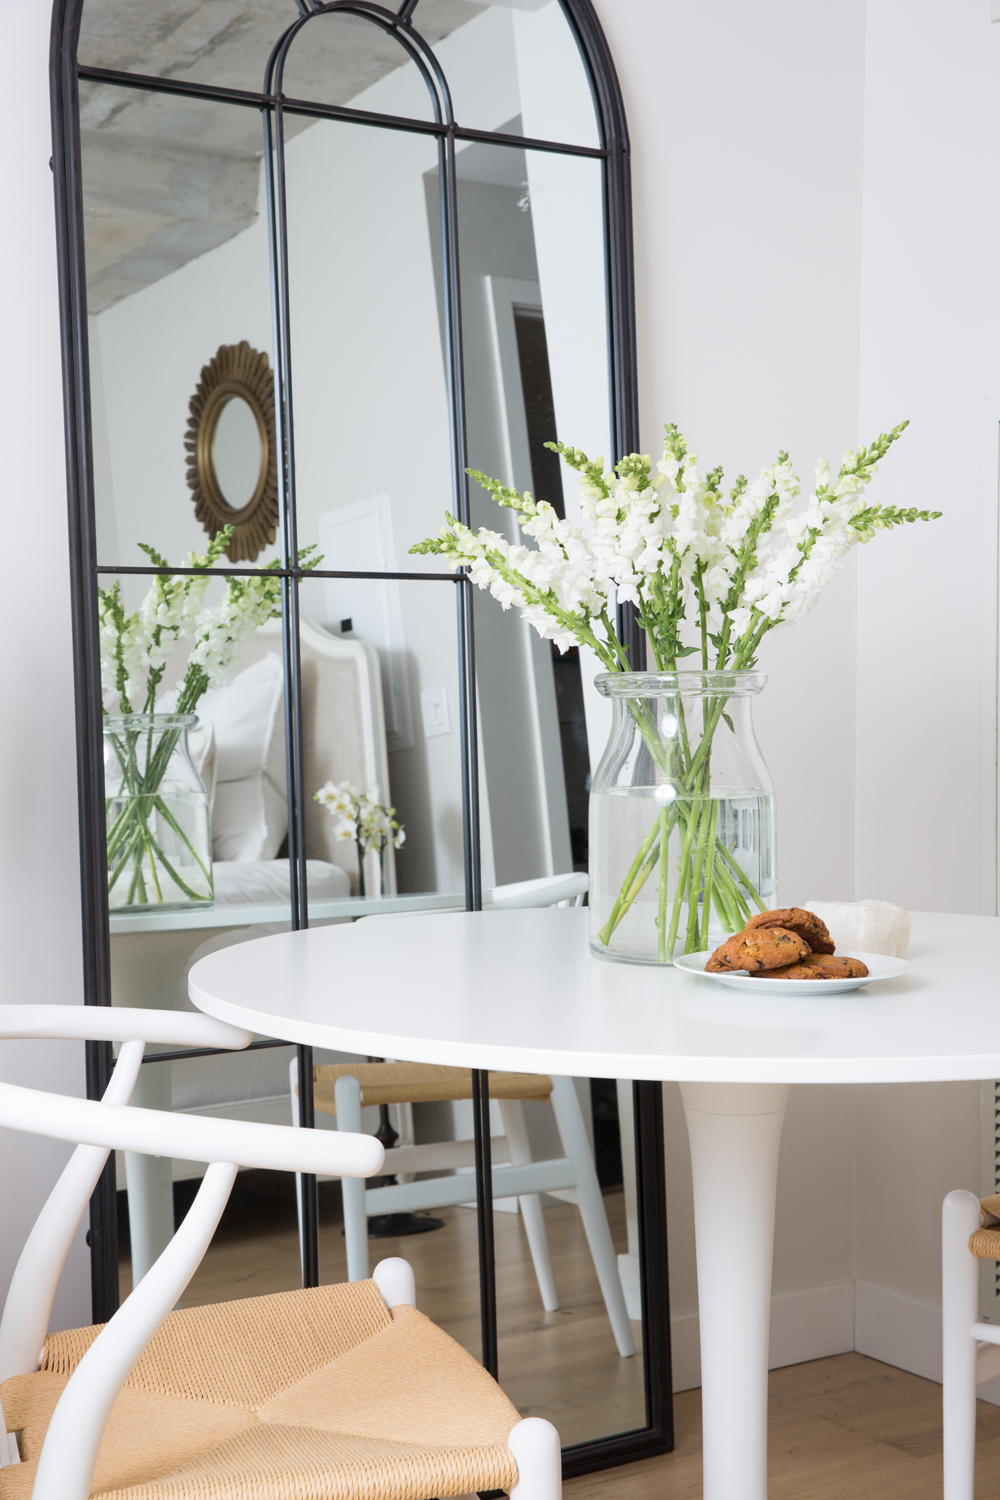 Mirror against white wall with a small table in the forground